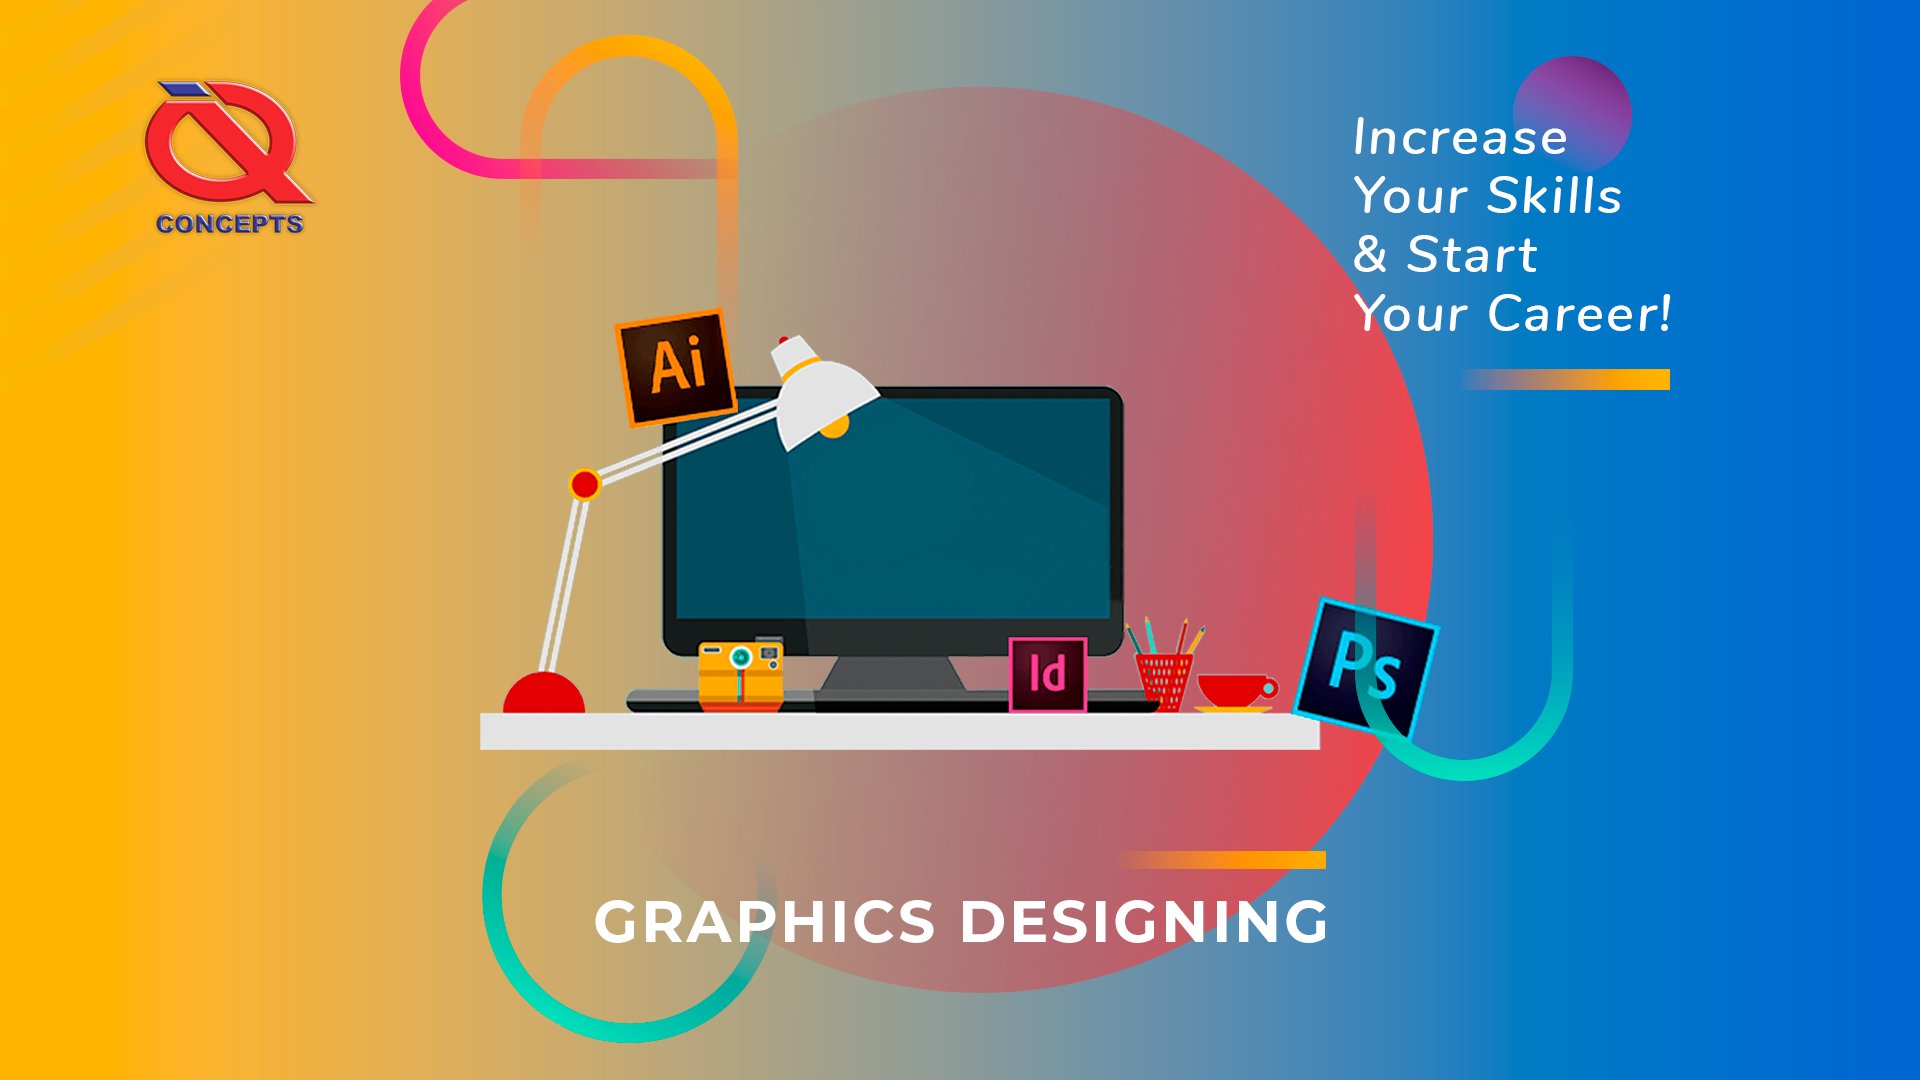 iq-pass-education-images-graphics-designing-course